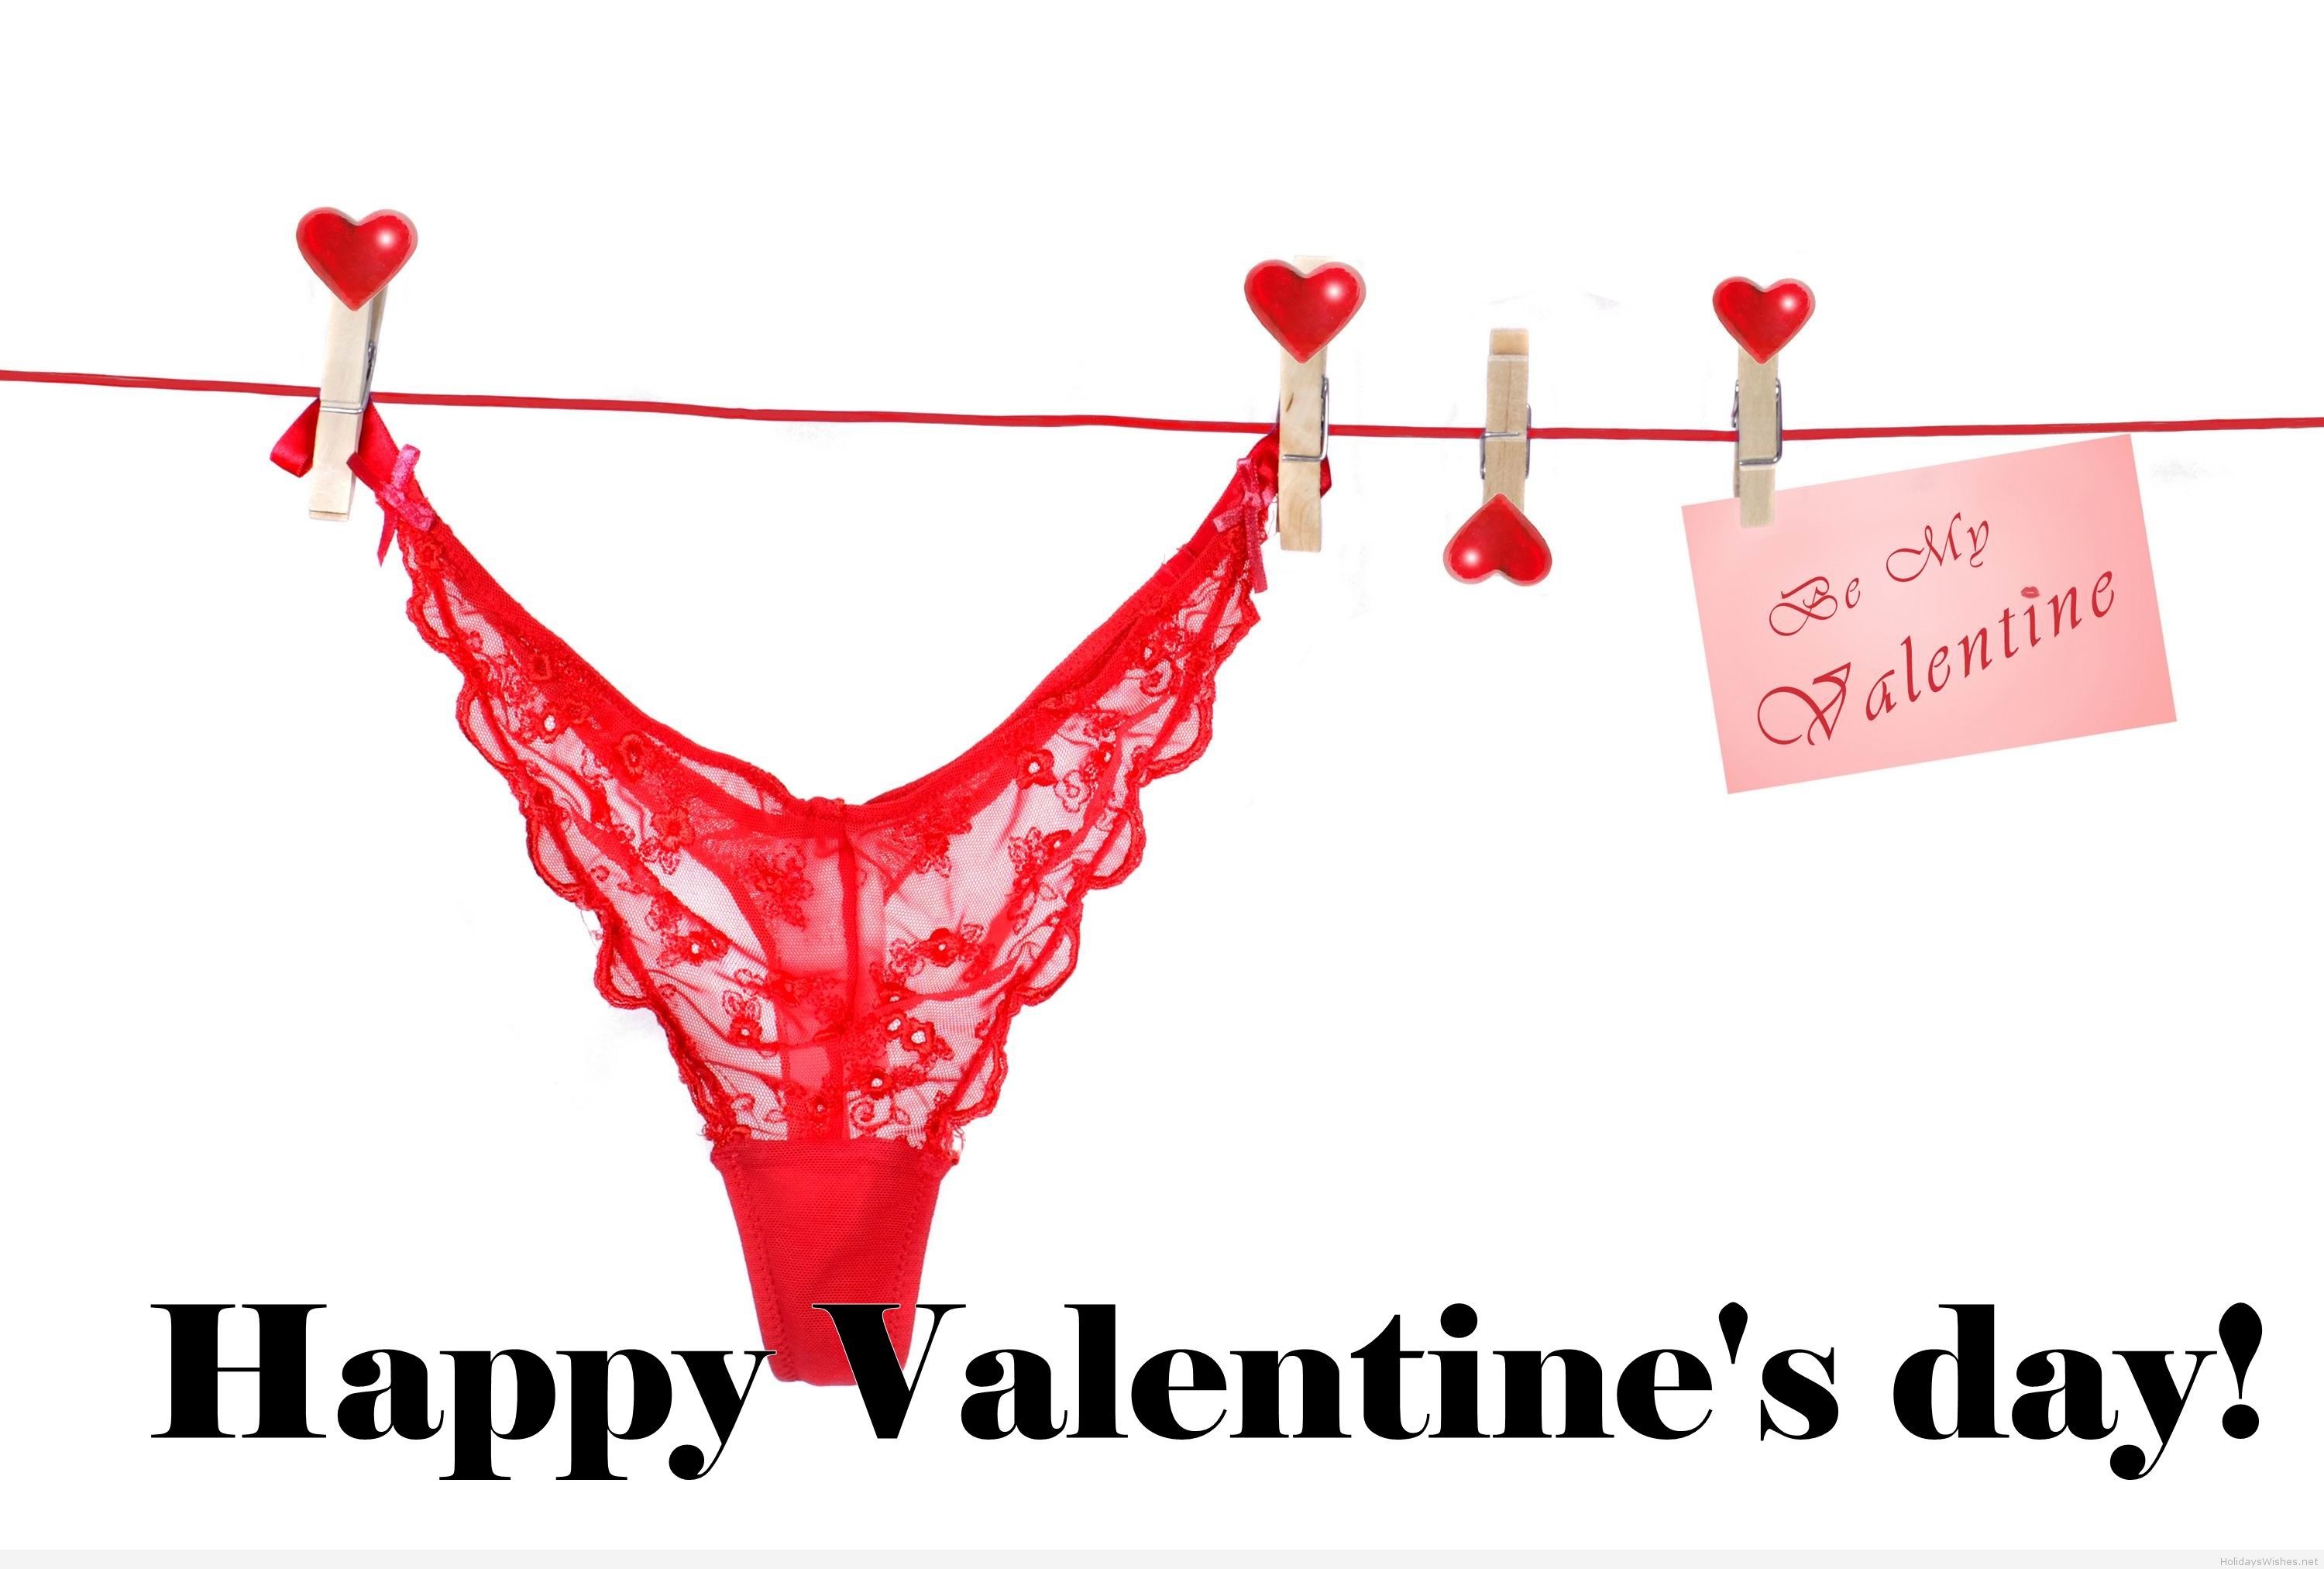 Playful Valentine's Day Pics: Let Loose and Have Fun